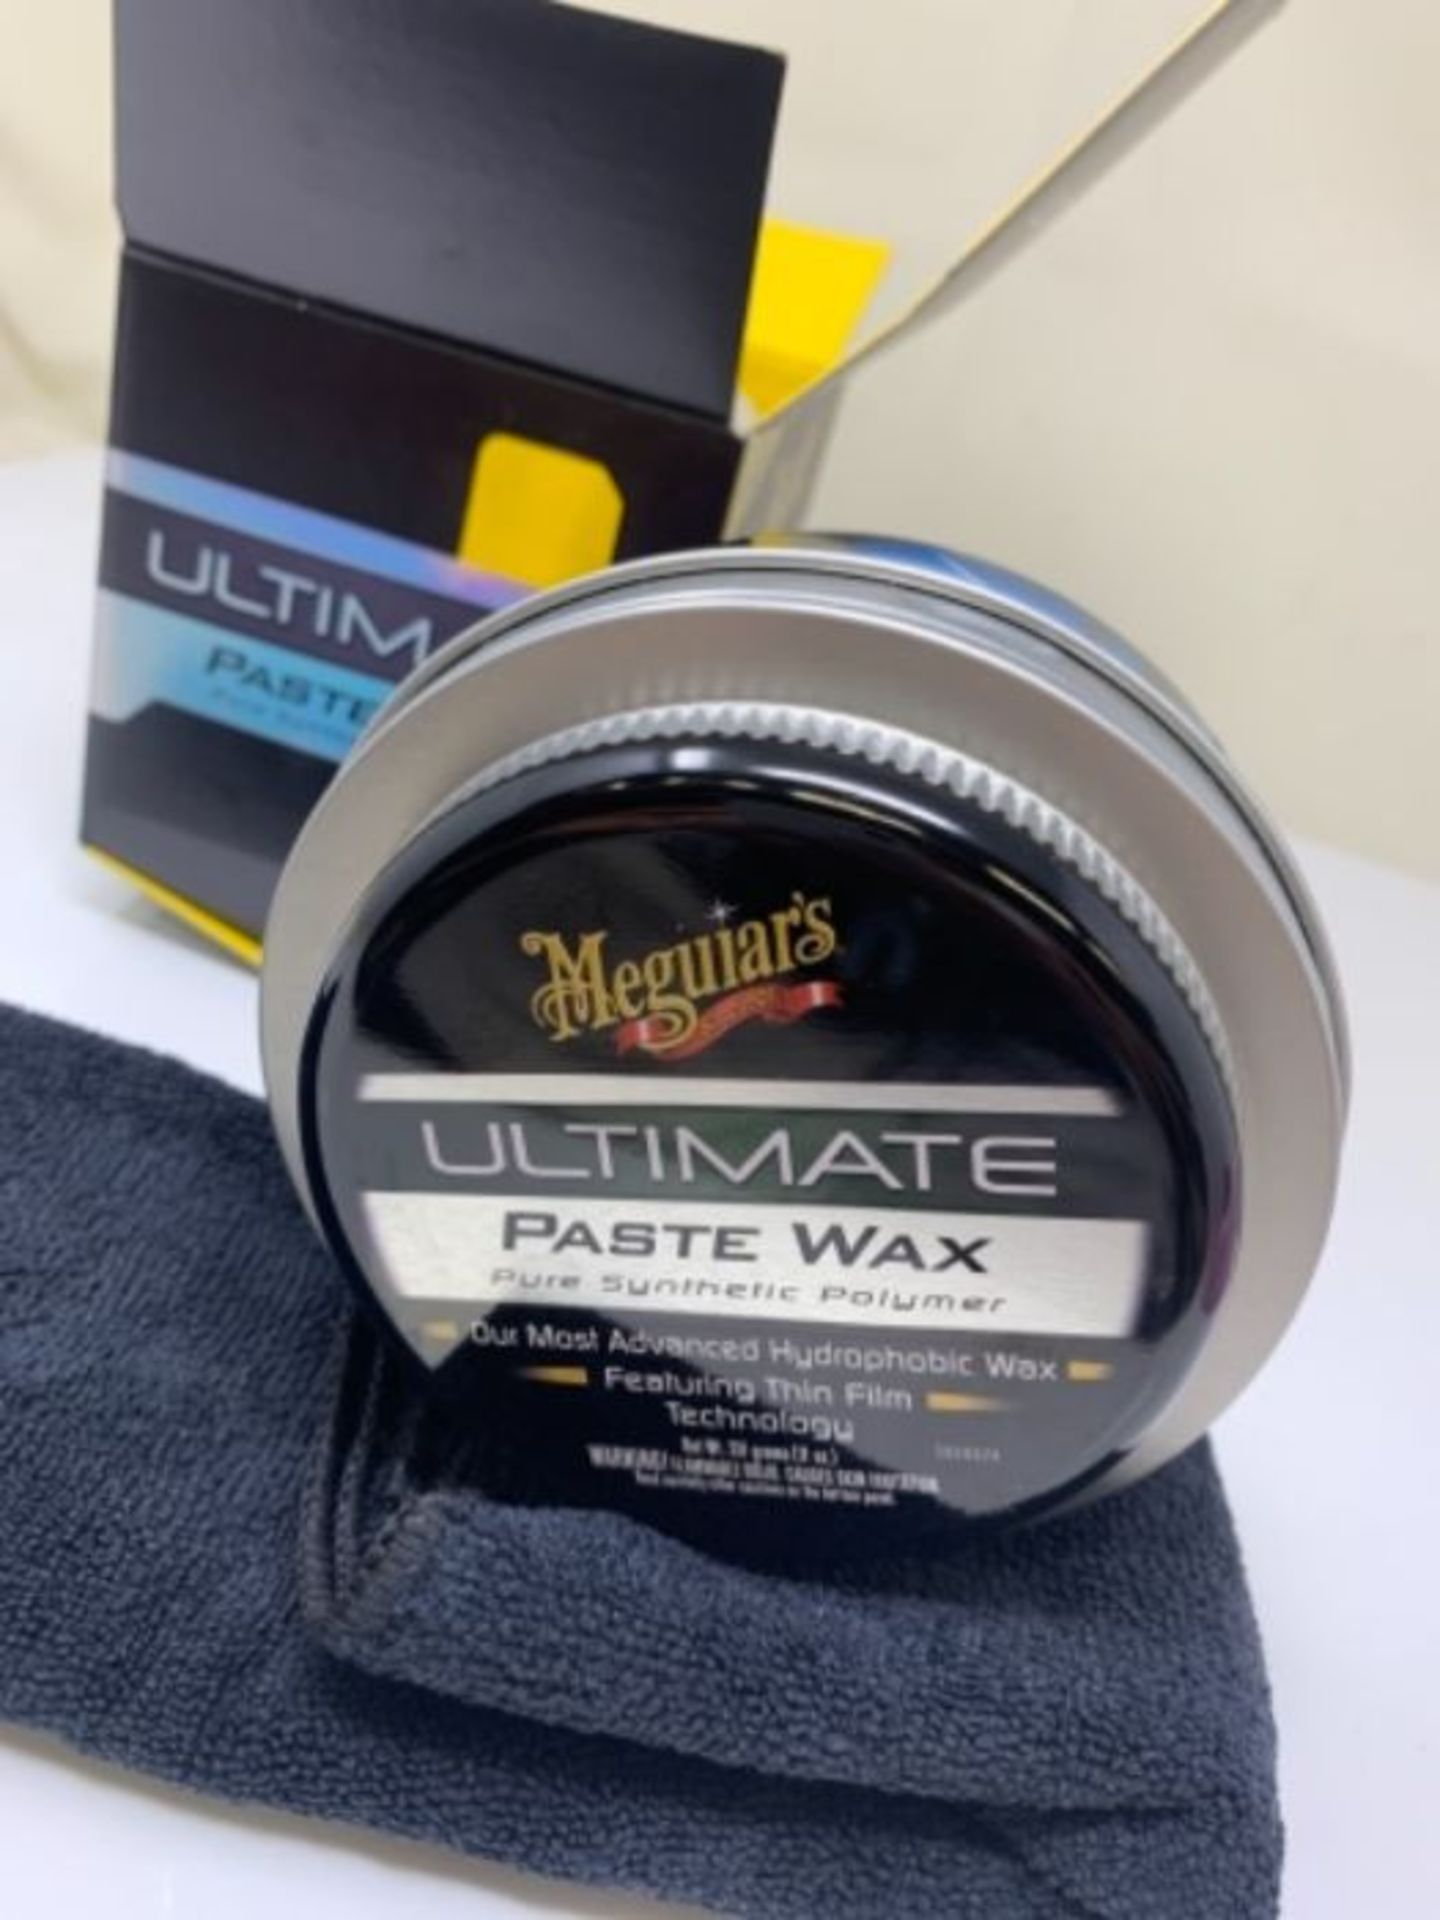 Meguiar's G18211 Ultimate Paste Car Wax 311g Pure Synthetic Polymer Car Wax - Image 3 of 3